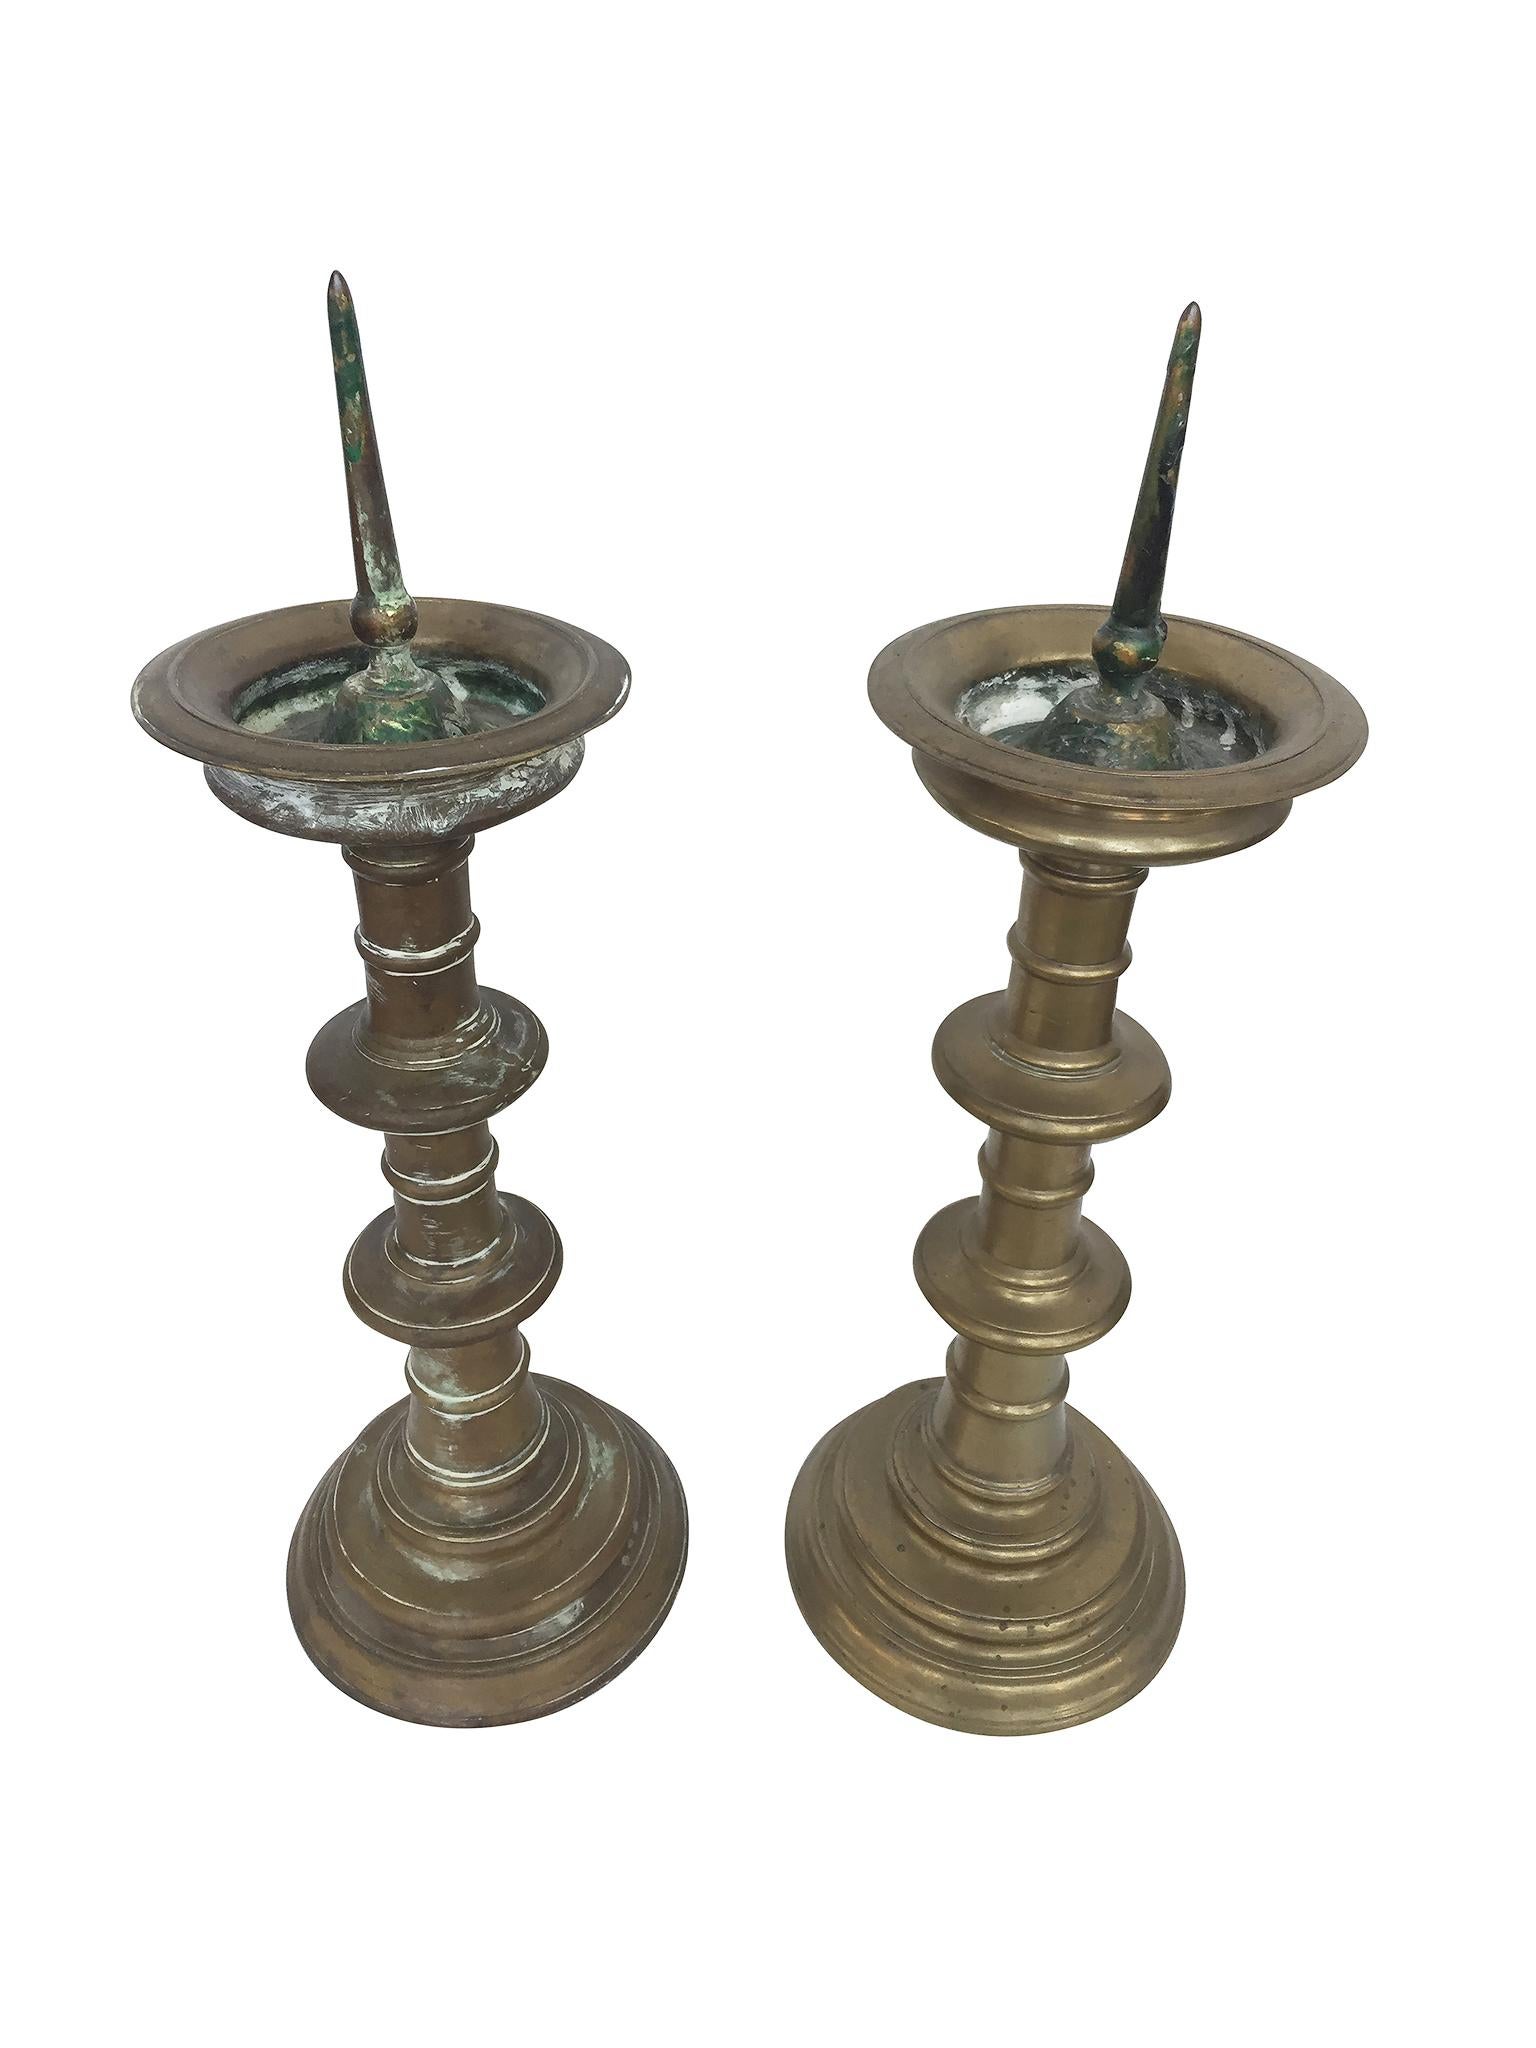 These 18th century Dutch candlesticks are comprised of brass. The drip pan at top is upswept , while the stem is turned and resting on a concentric base.
The patina and coloration differs between the candlesticks, which adds a textured sense of